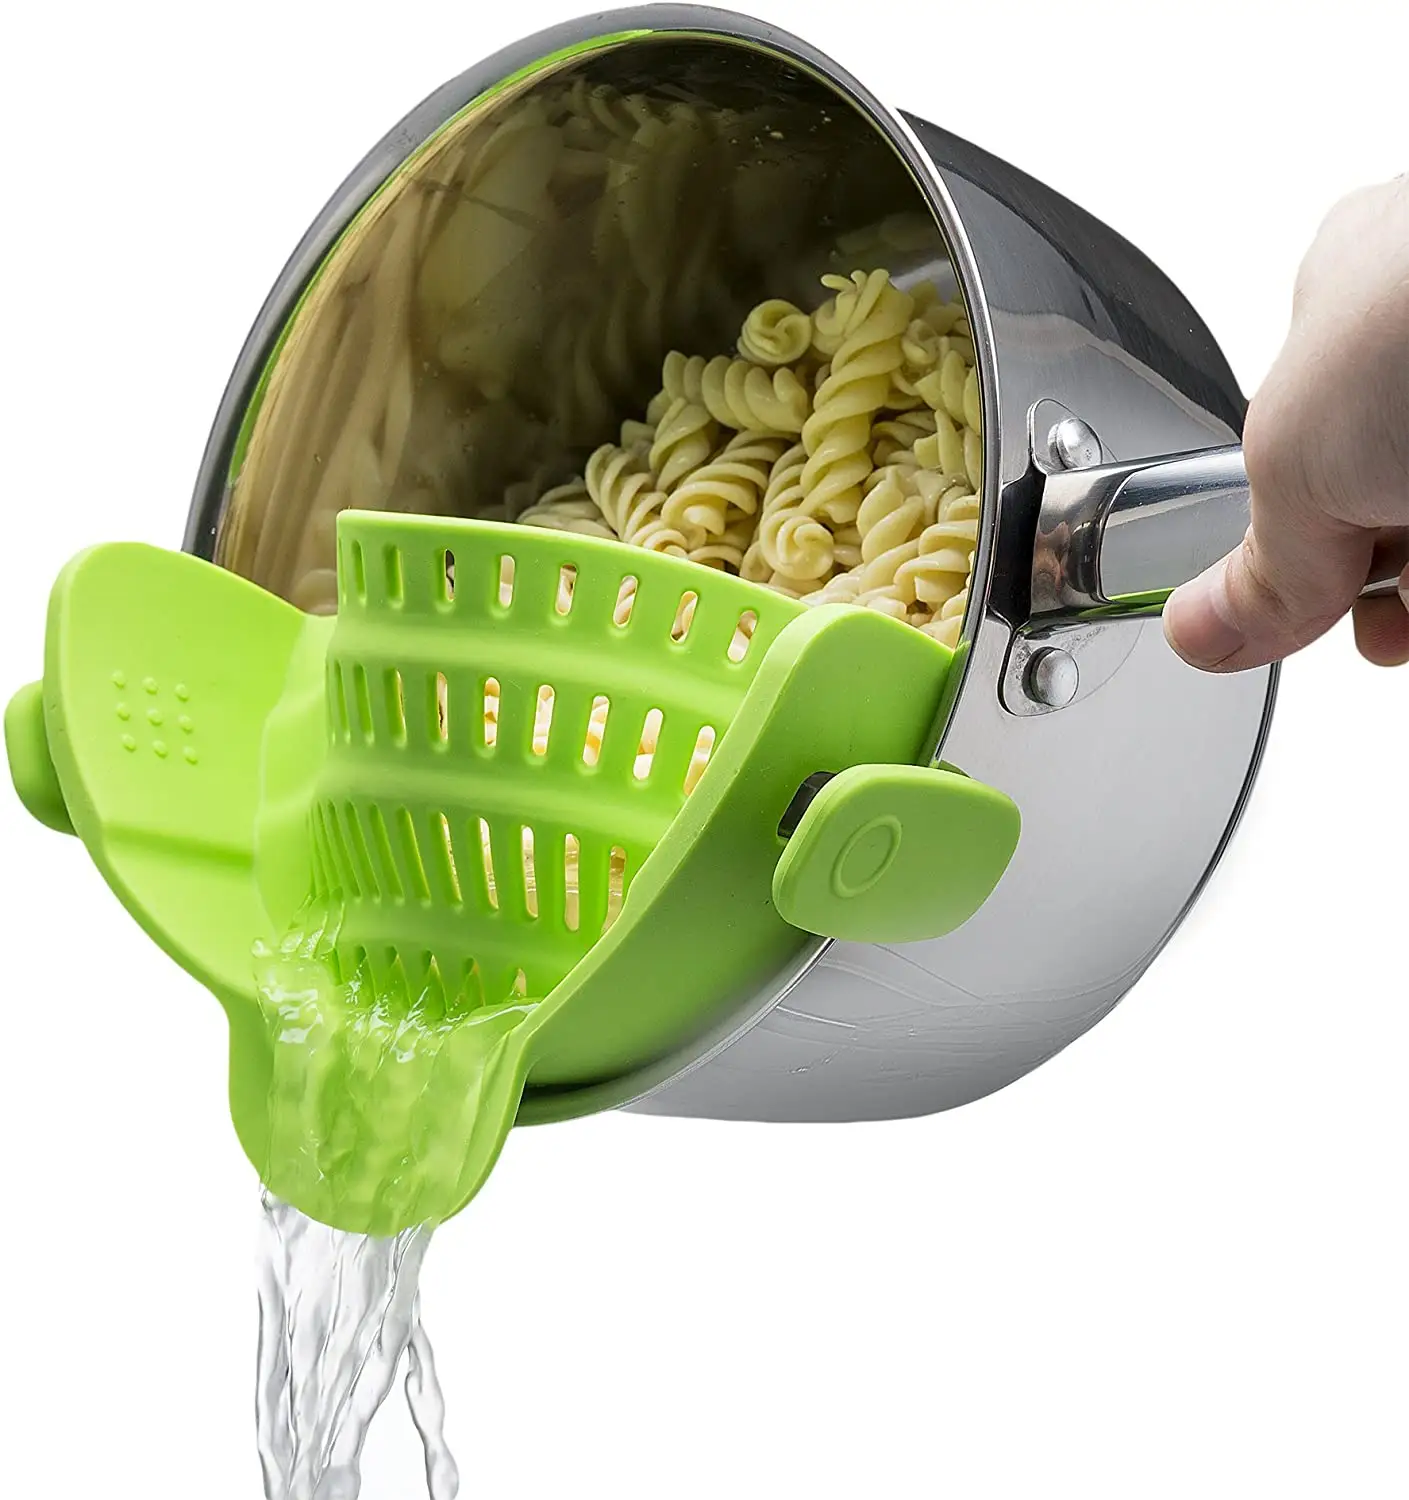 2021 Amazon hot sale Heat Resistant Silicone Strainer Snap Clip on Kitchen Pot Food Strainer for Pans Bowls